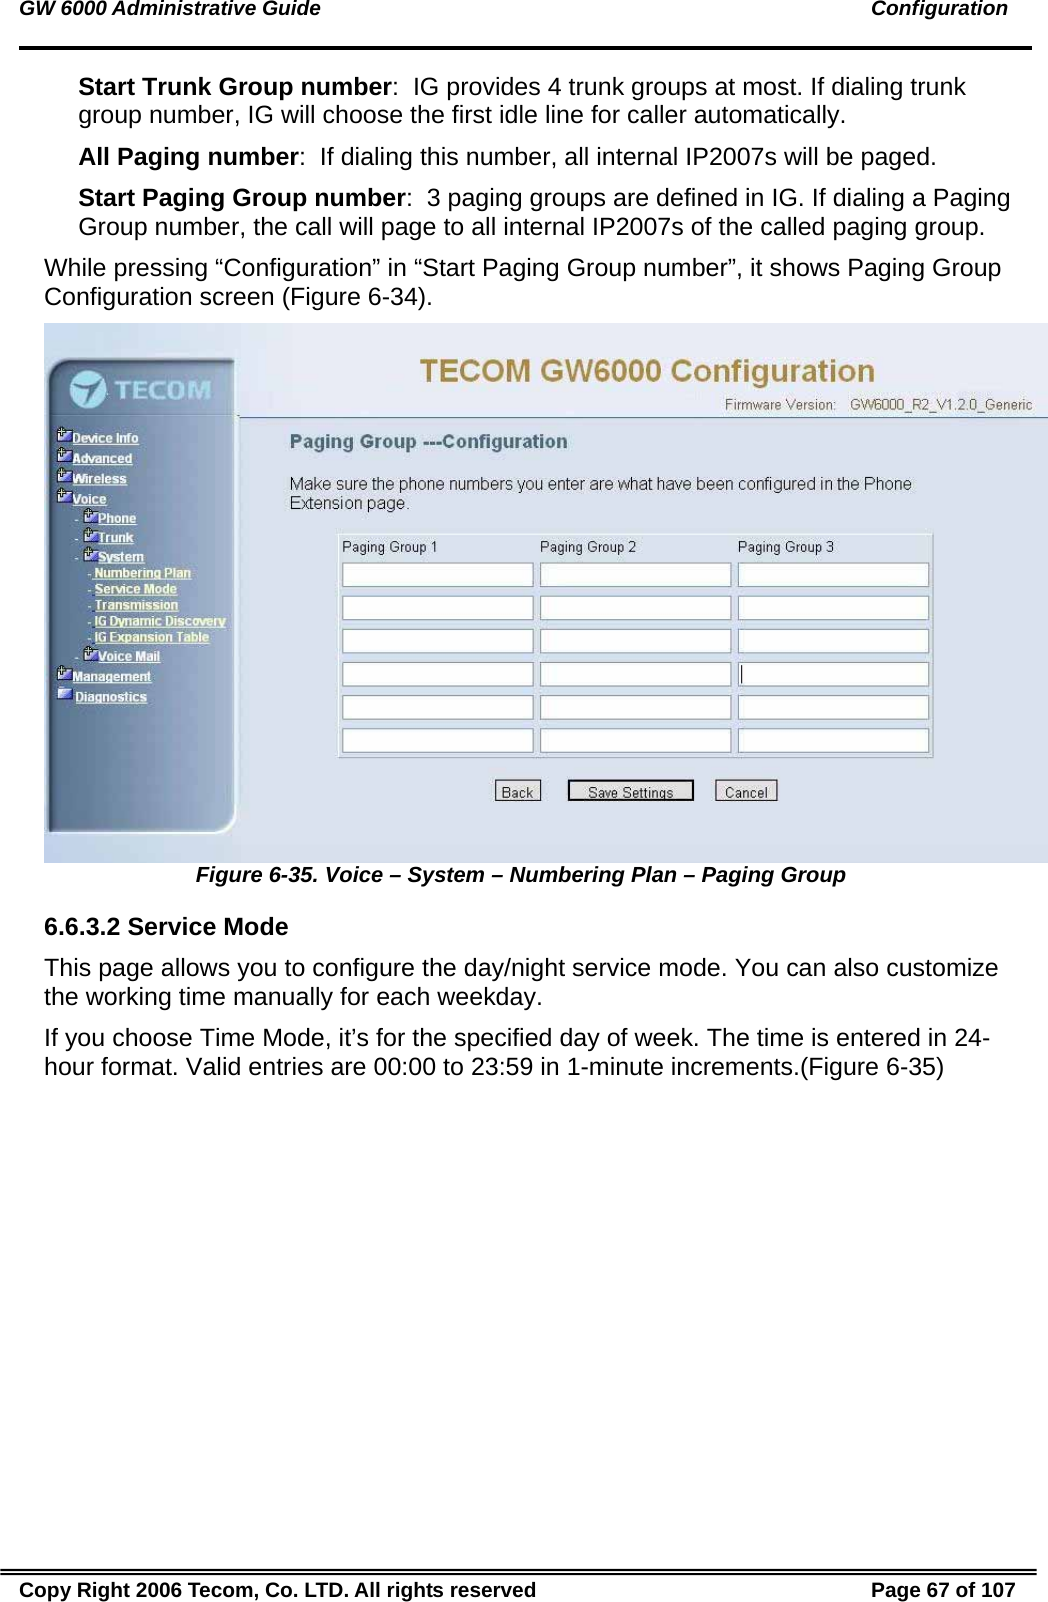 GW 6000 Administrative Guide                                                                                               Configuration Start Trunk Group number:  IG provides 4 trunk groups at most. If dialing trunk group number, IG will choose the first idle line for caller automatically. All Paging number:  If dialing this number, all internal IP2007s will be paged. Start Paging Group number:  3 paging groups are defined in IG. If dialing a Paging Group number, the call will page to all internal IP2007s of the called paging group. While pressing “Configuration” in “Start Paging Group number”, it shows Paging Group Configuration screen (Figure 6-34).  Figure 6-35. Voice – System – Numbering Plan – Paging Group 6.6.3.2 Service Mode This page allows you to configure the day/night service mode. You can also customize the working time manually for each weekday. If you choose Time Mode, it’s for the specified day of week. The time is entered in 24-hour format. Valid entries are 00:00 to 23:59 in 1-minute increments.(Figure 6-35) Copy Right 2006 Tecom, Co. LTD. All rights reserved  Page 67 of 107 